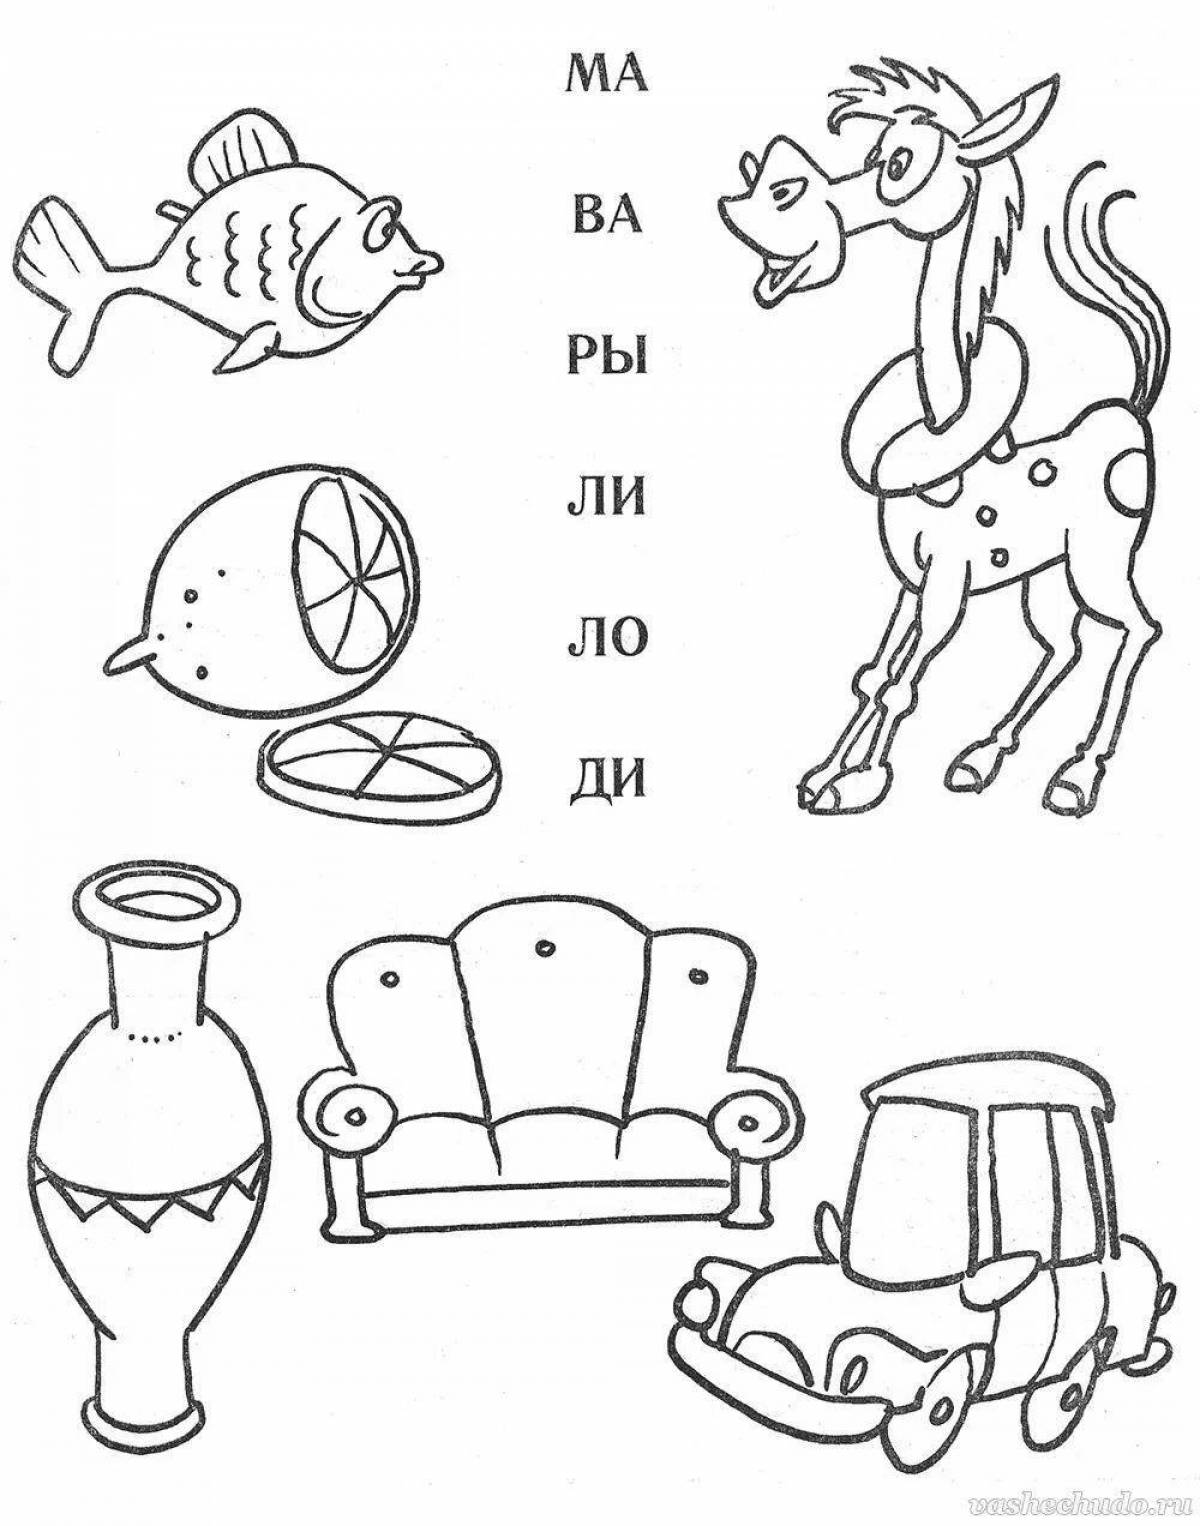 Fun syllable coloring pages for preschoolers 6-7 years old